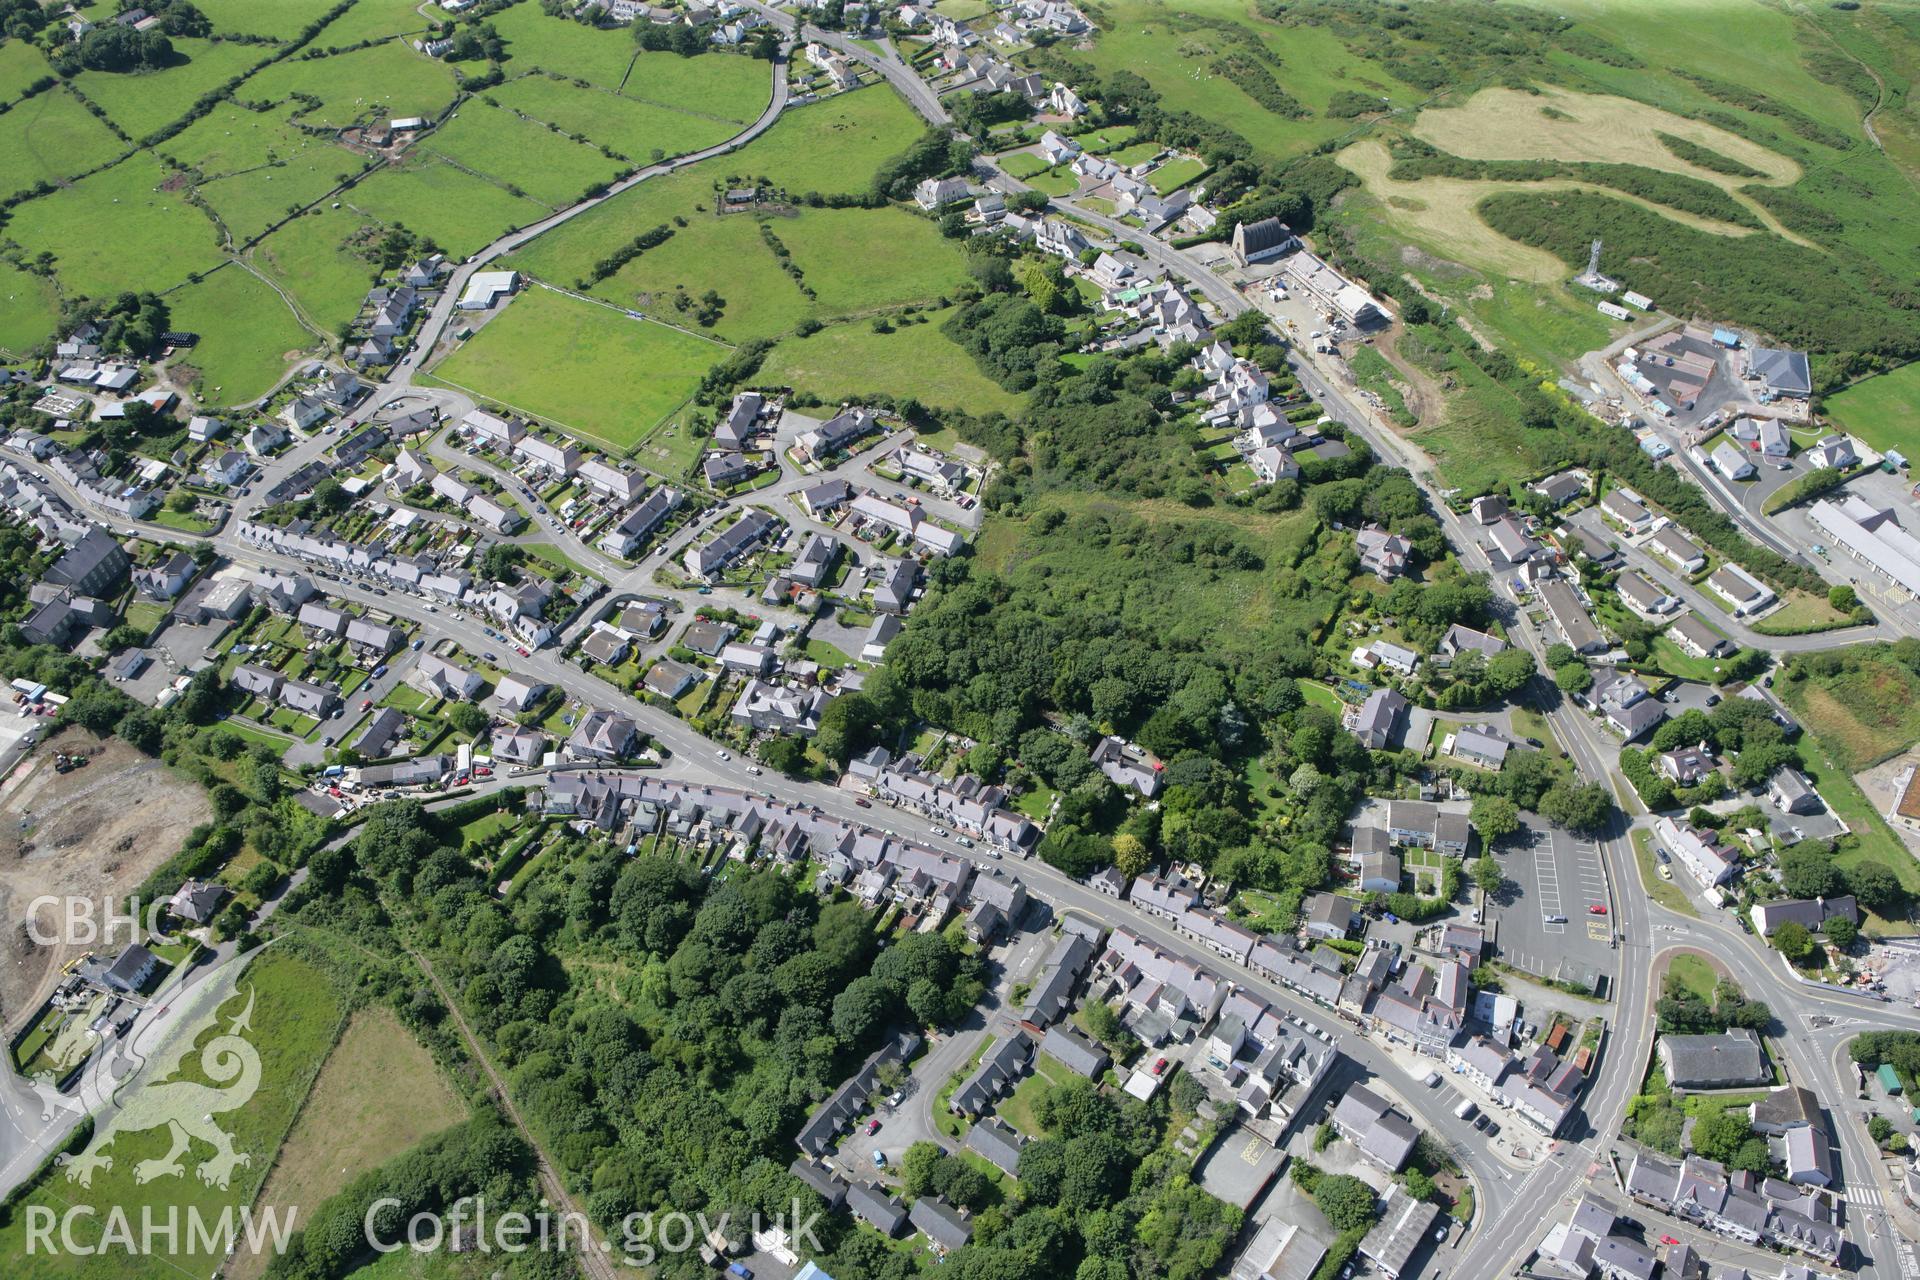 RCAHMW colour oblique photograph of Amlwch village, high view from south-east. Taken by Toby Driver on 20/07/2011.